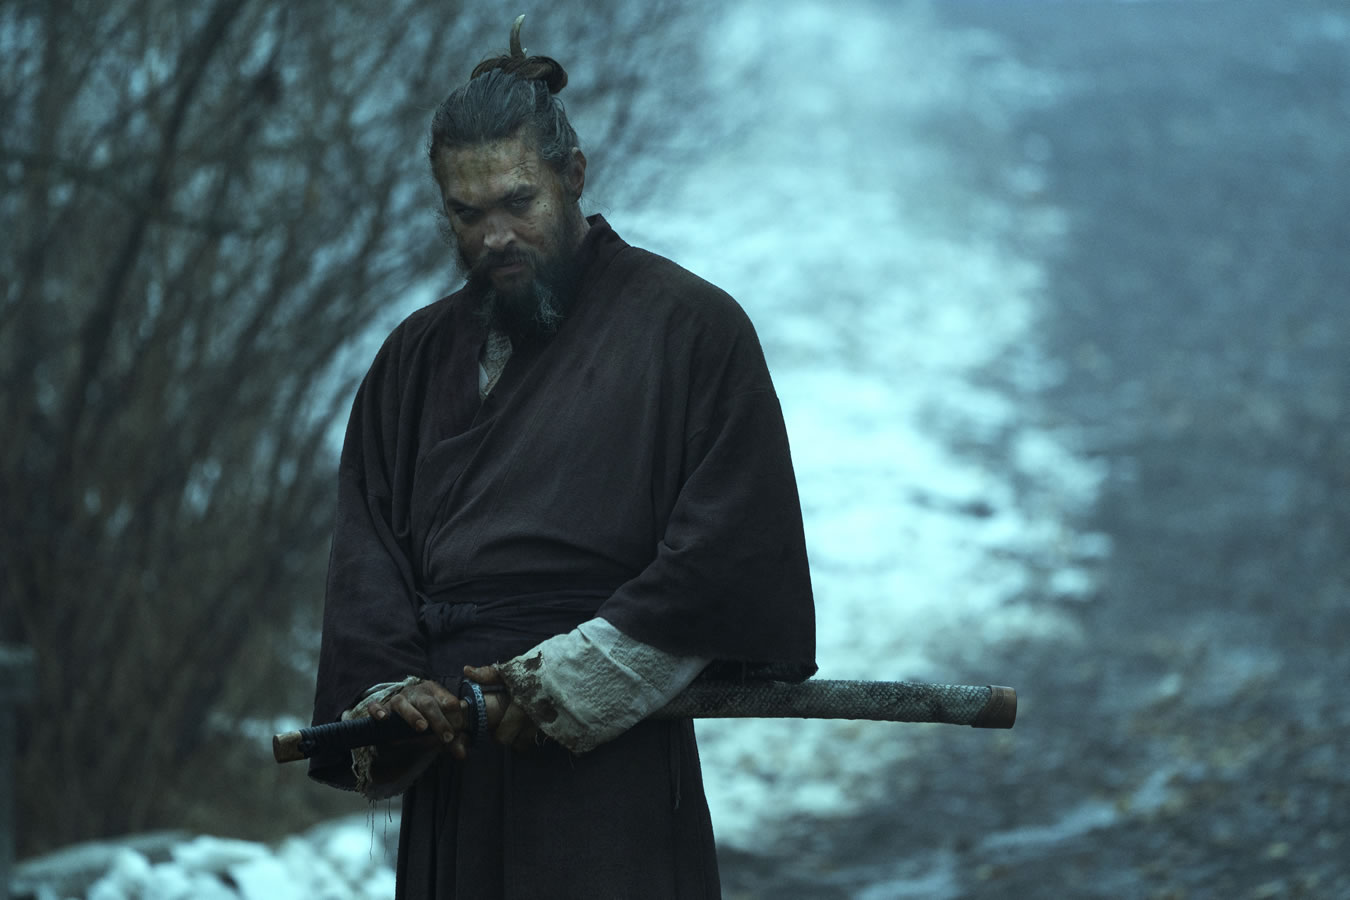 Jason Momoa, hair is in a top knot, wearing a gi holding a sword in the woods. Image courtesy of Apple